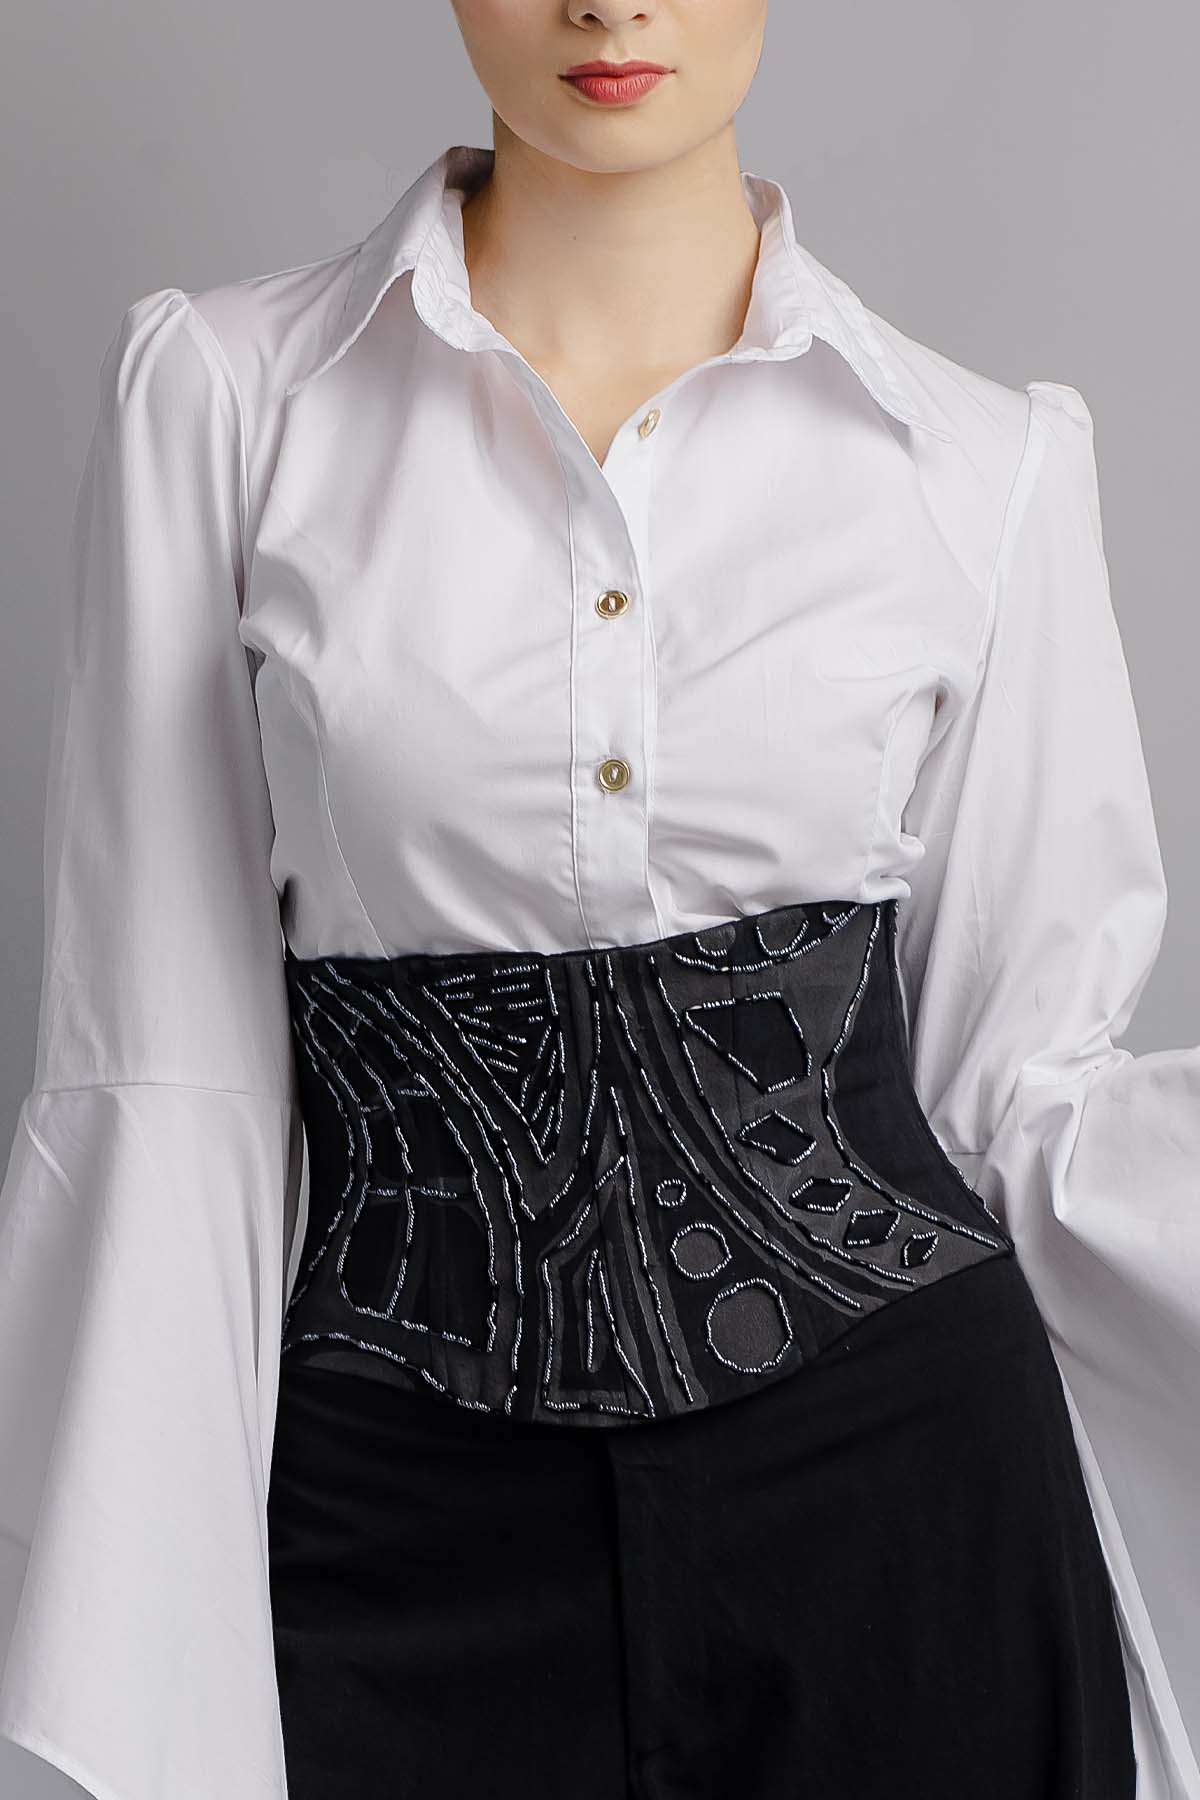 HAND-PAINTED AND HAND-EMBROIDERED CORSET BELT - PAQUIME